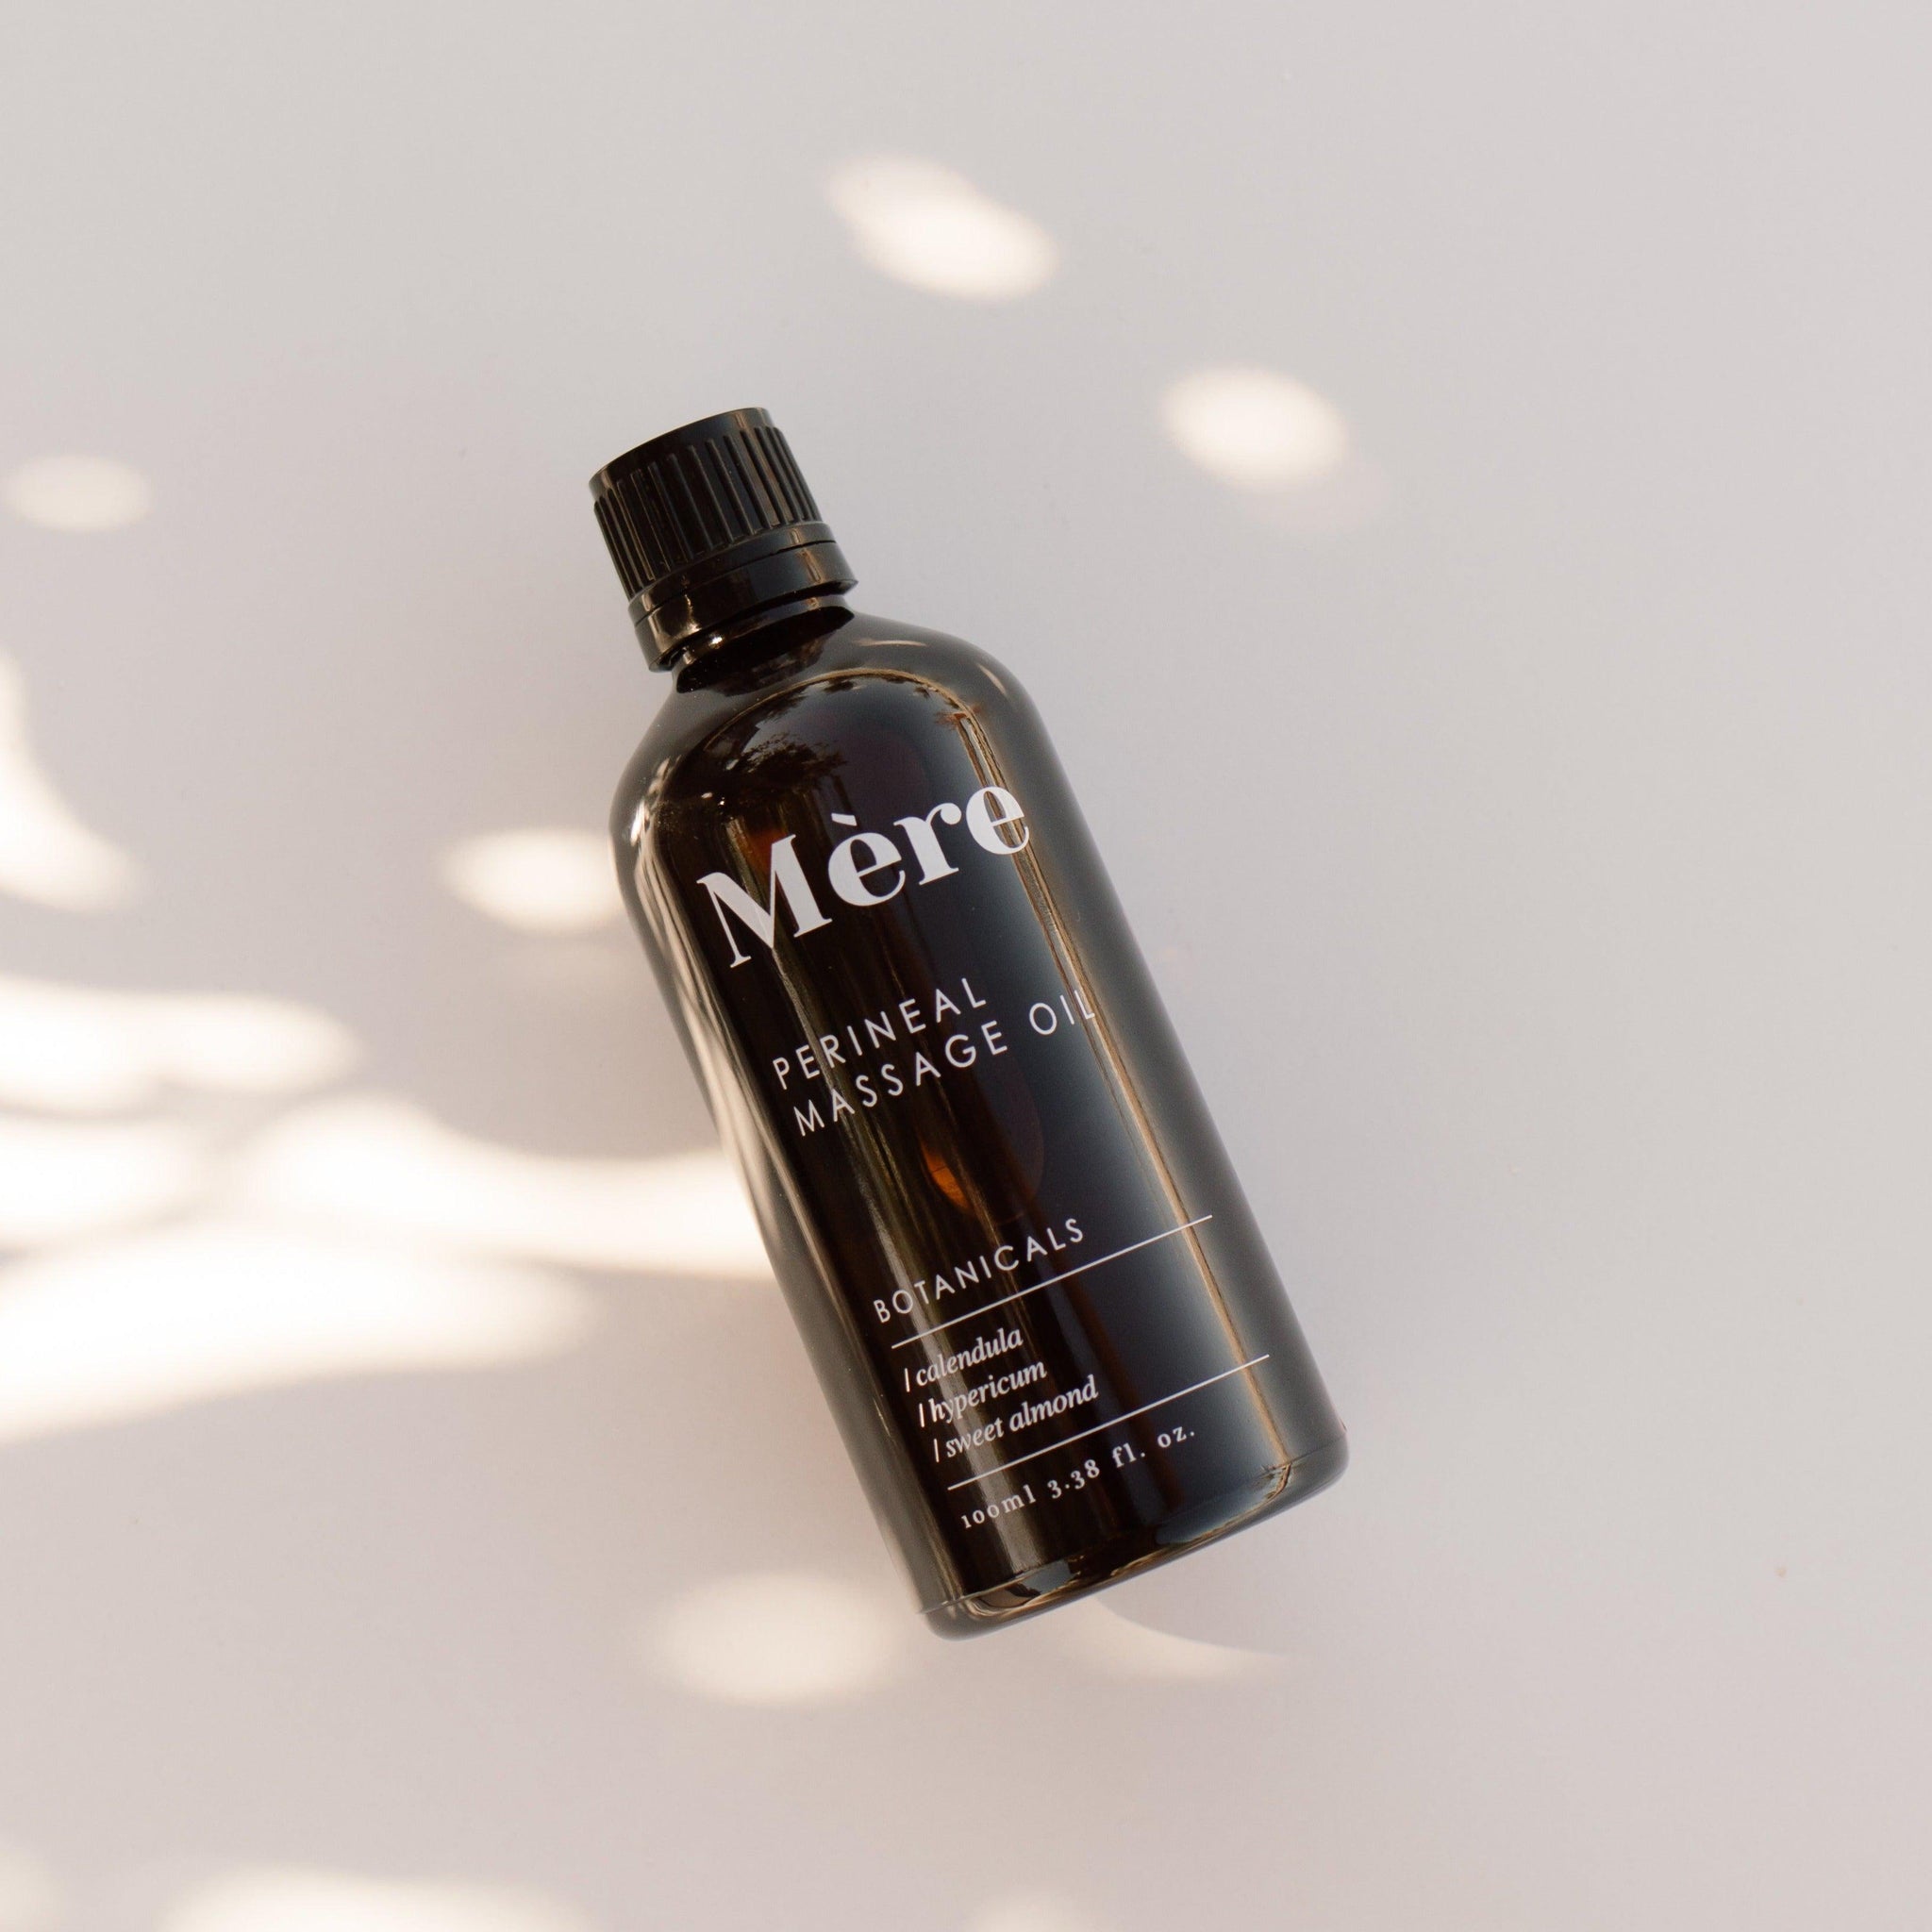 Nourish and prepare the delicate perineal skin in preparation for birth with regular massage with our peri massage oil of Sweet almond oil combined with Calendula and Hypericum infused oils to keep skin soft, flexible and relaxed, ready for childbirth.